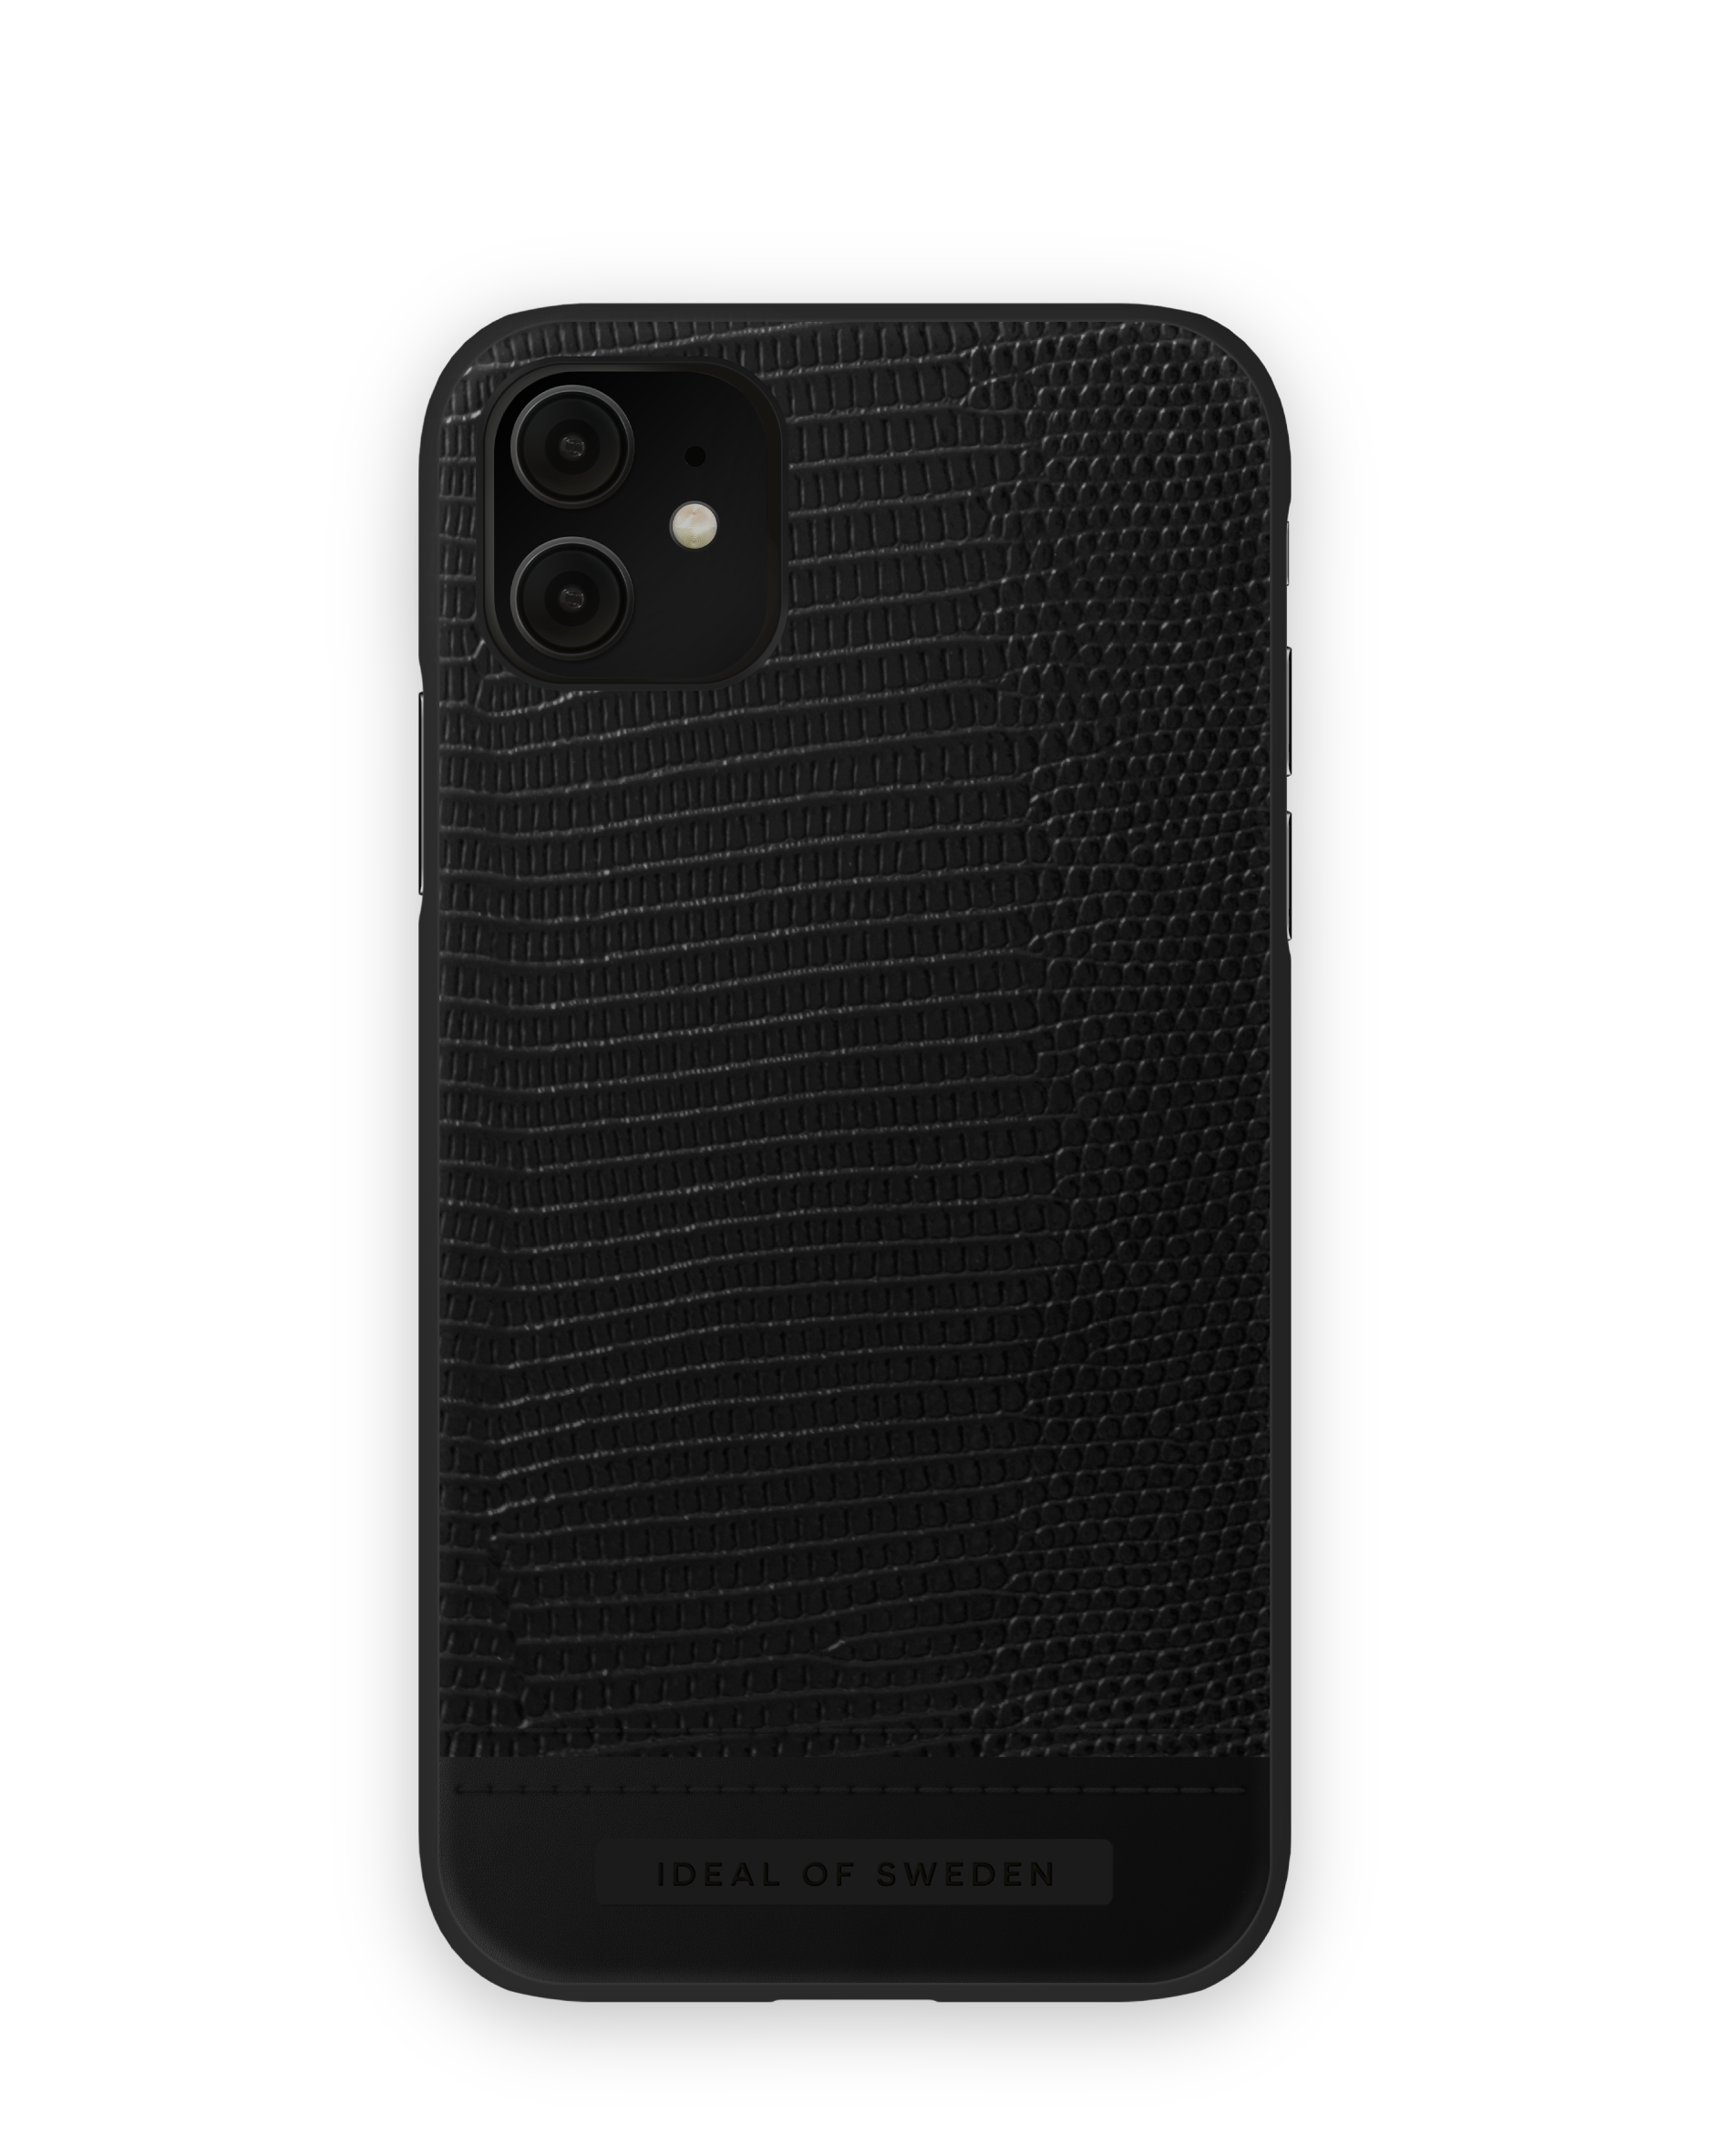 Eagle XR, Backcover, iPhone IDEAL Apple, IDACAW20-1961-229, 11, OF SWEDEN Black iPhone